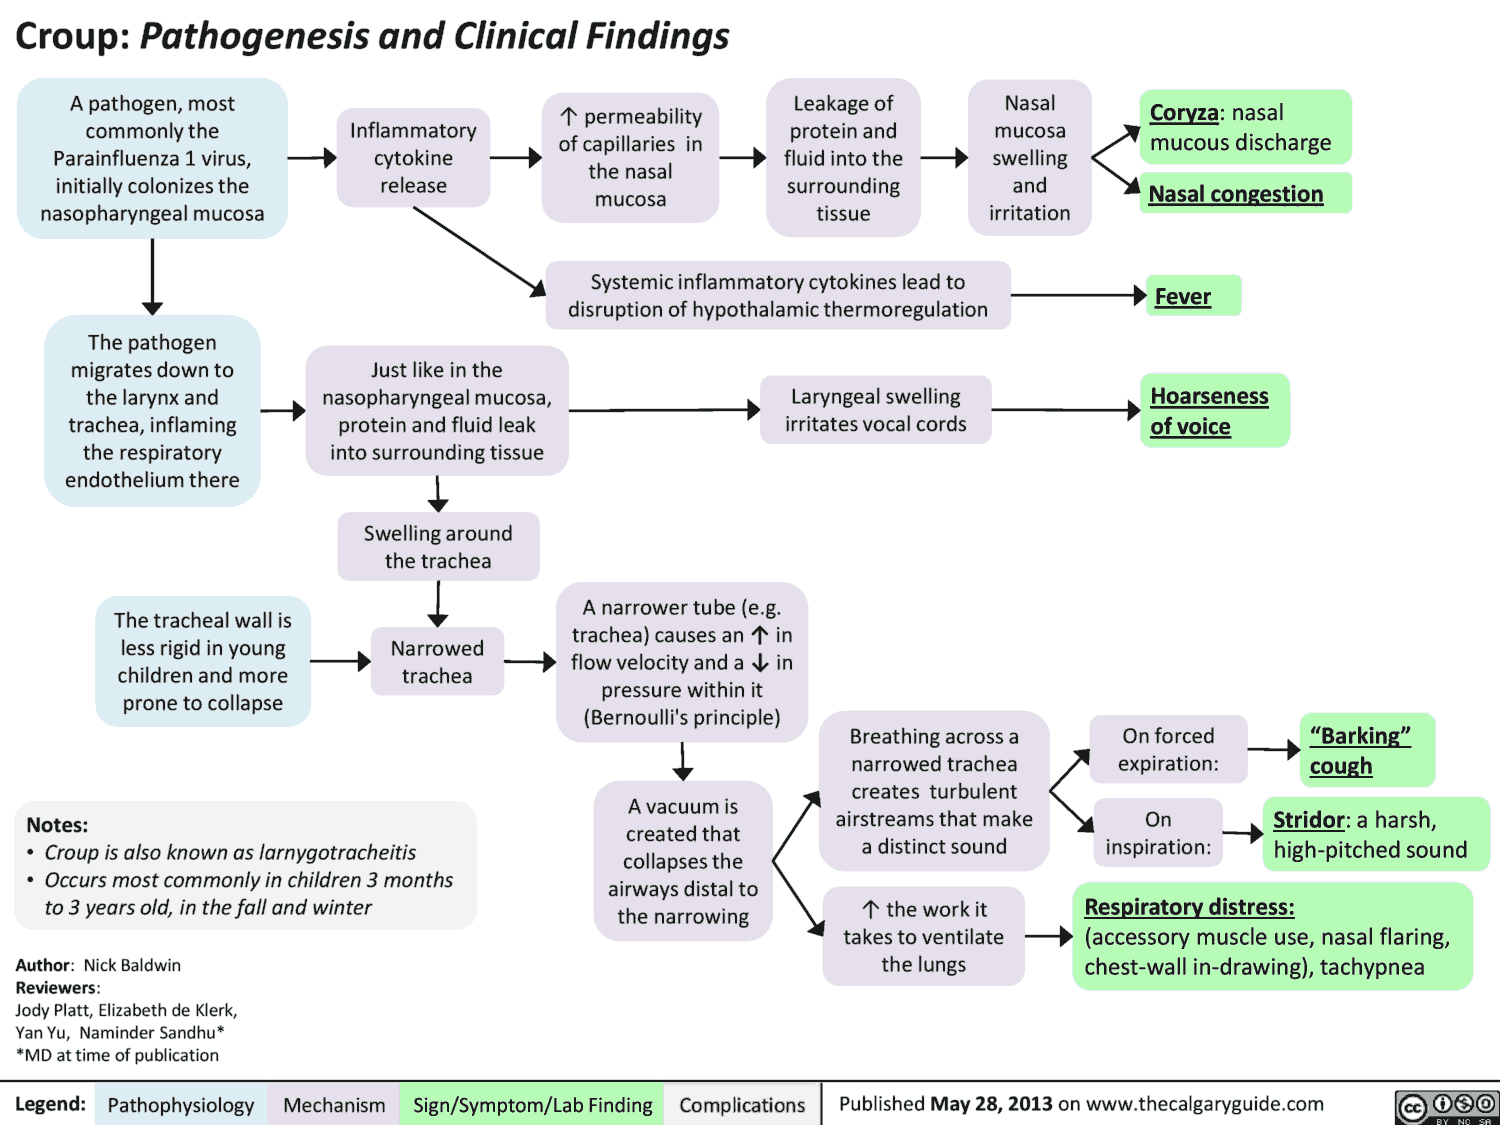 Croup - Pathogenesis and Clinical Findings